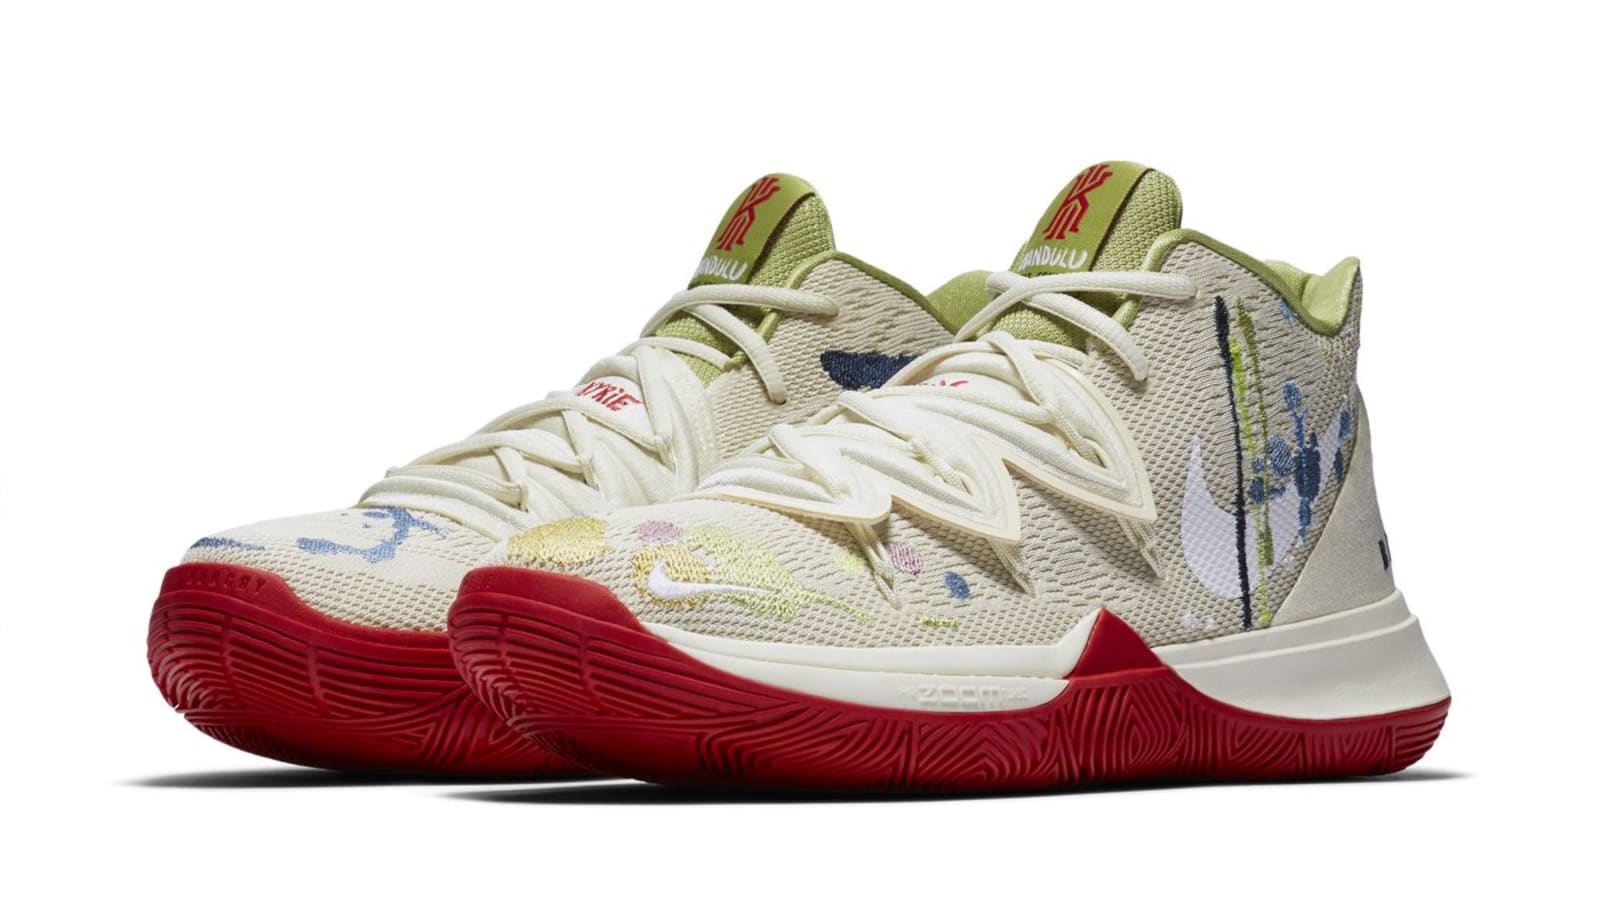 kyrie irving stranger things shoes